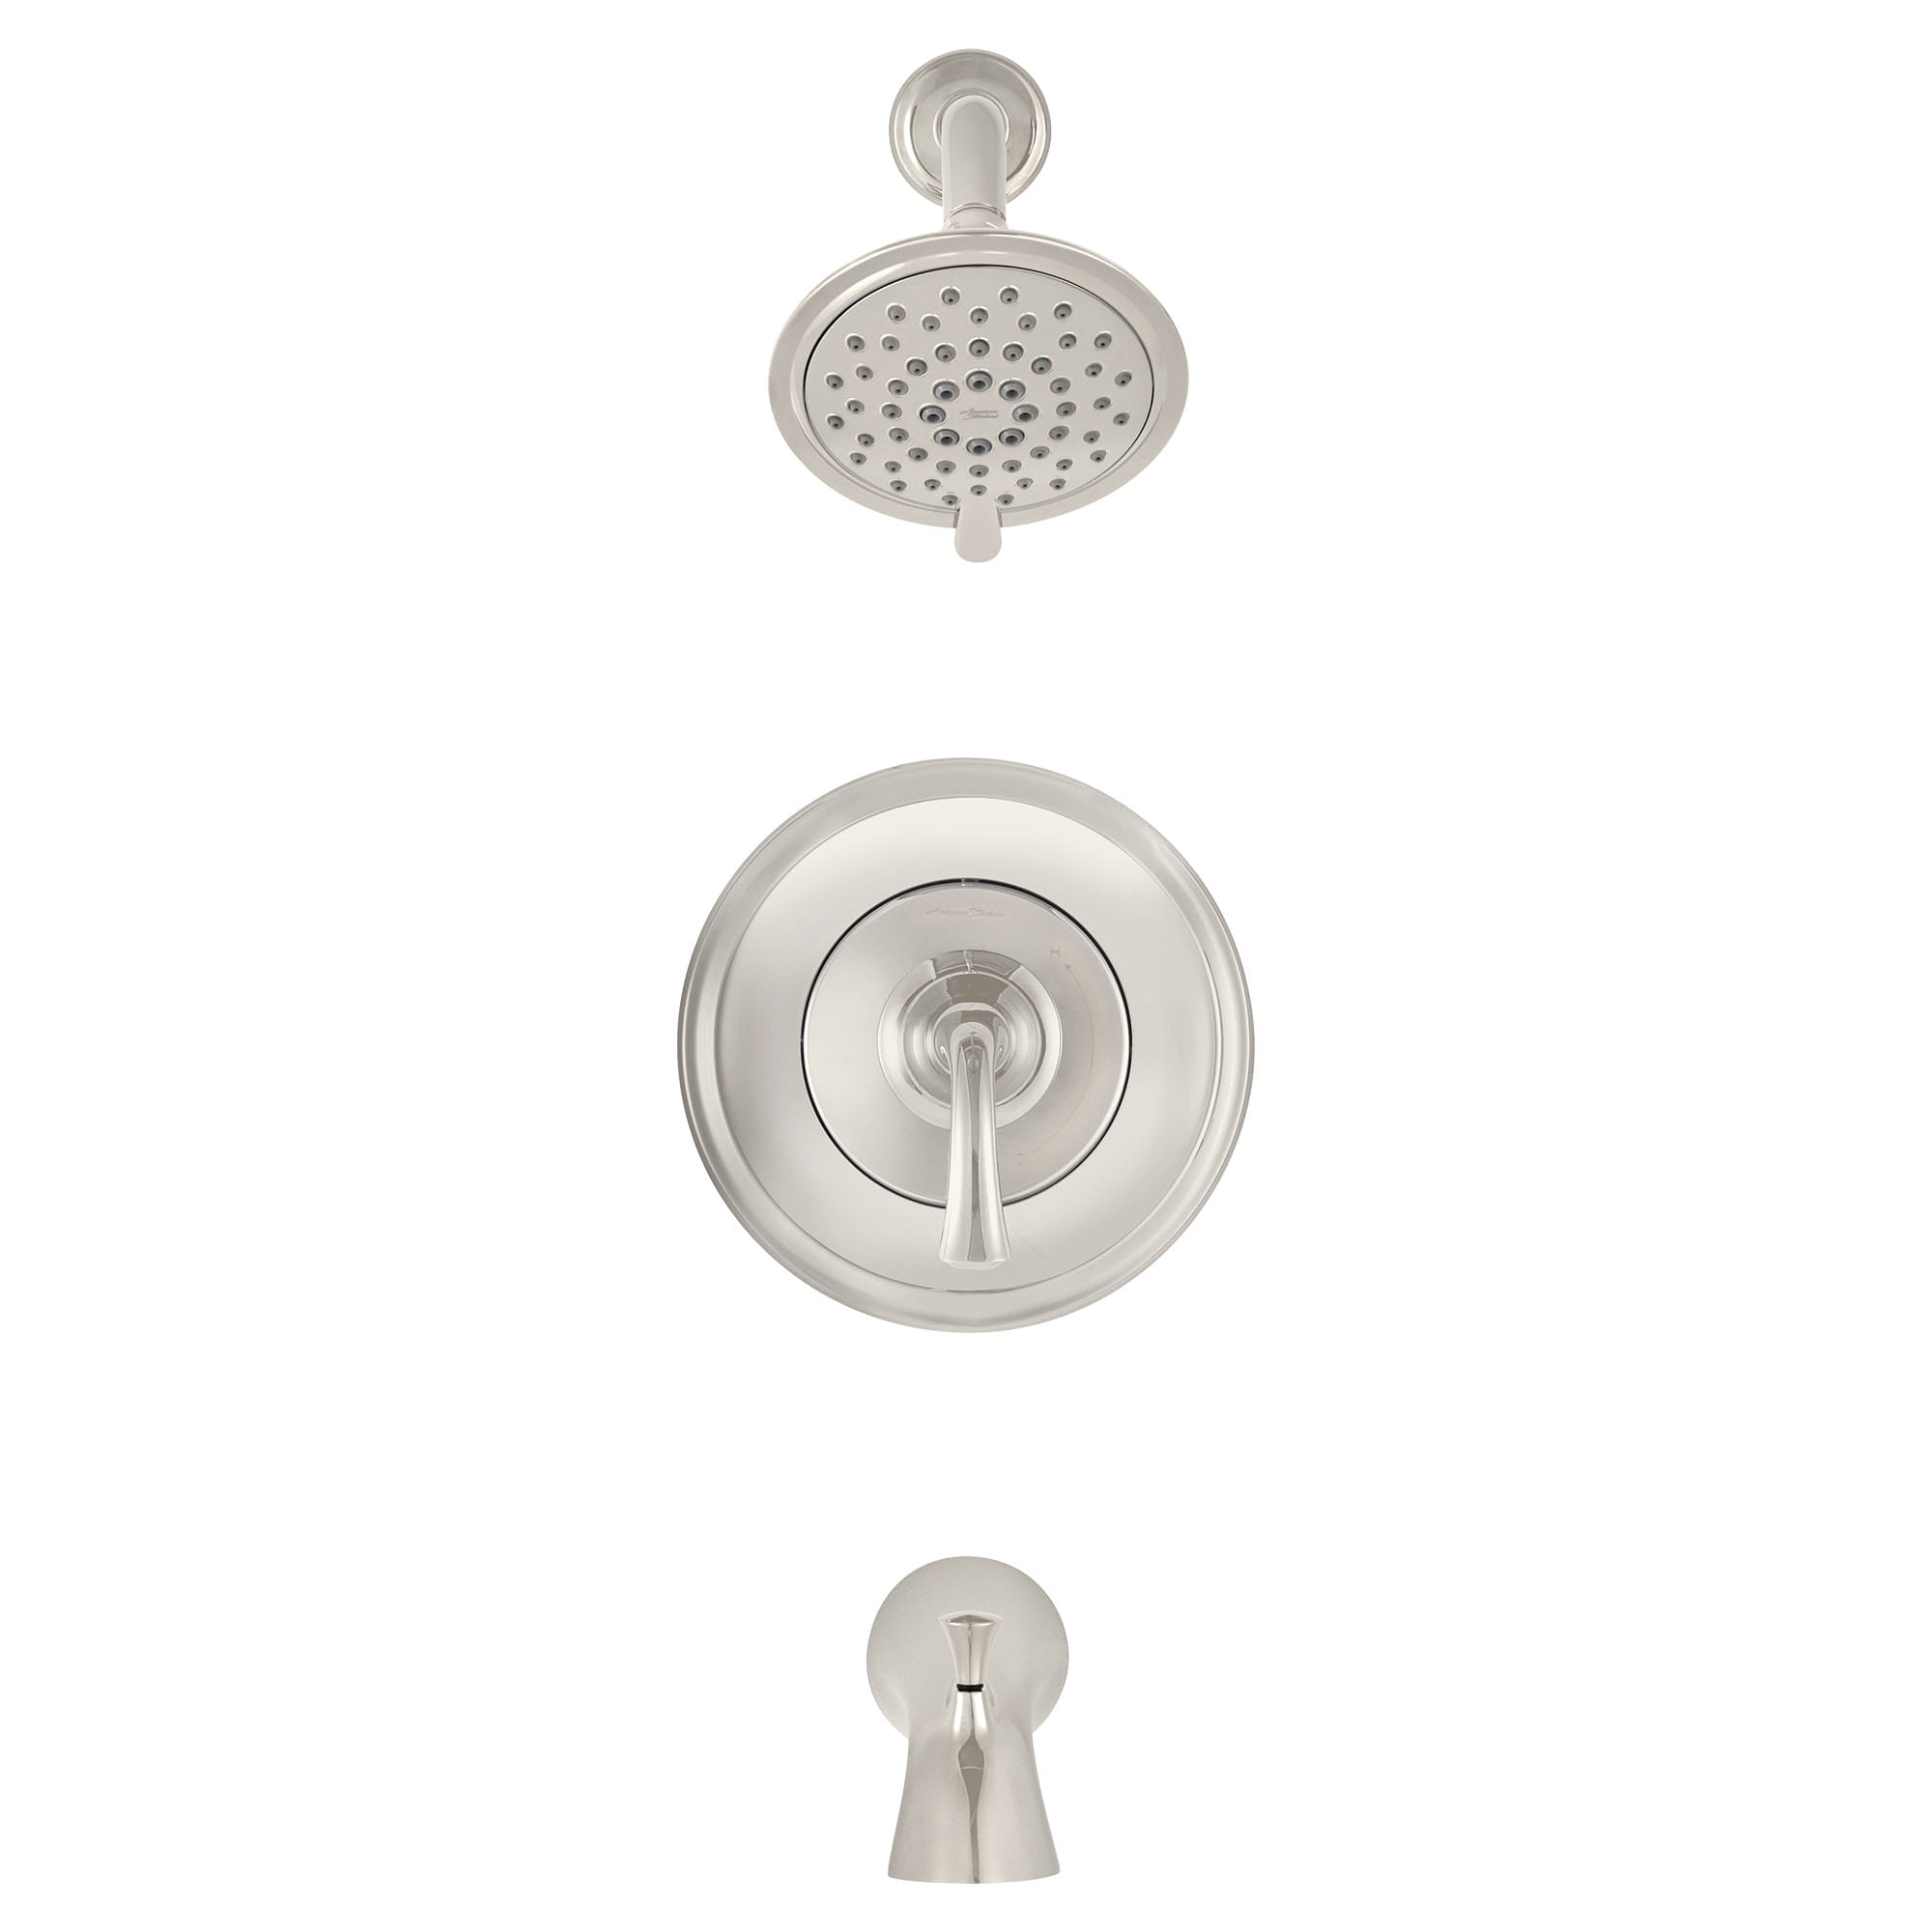 Patience 25 gpm 95 L min Tub and Shower Trim Kit With 3 Function Showerhead Double Ceramic Pressure Balance Cartridge With Lever Handle POLISHED  NICKEL